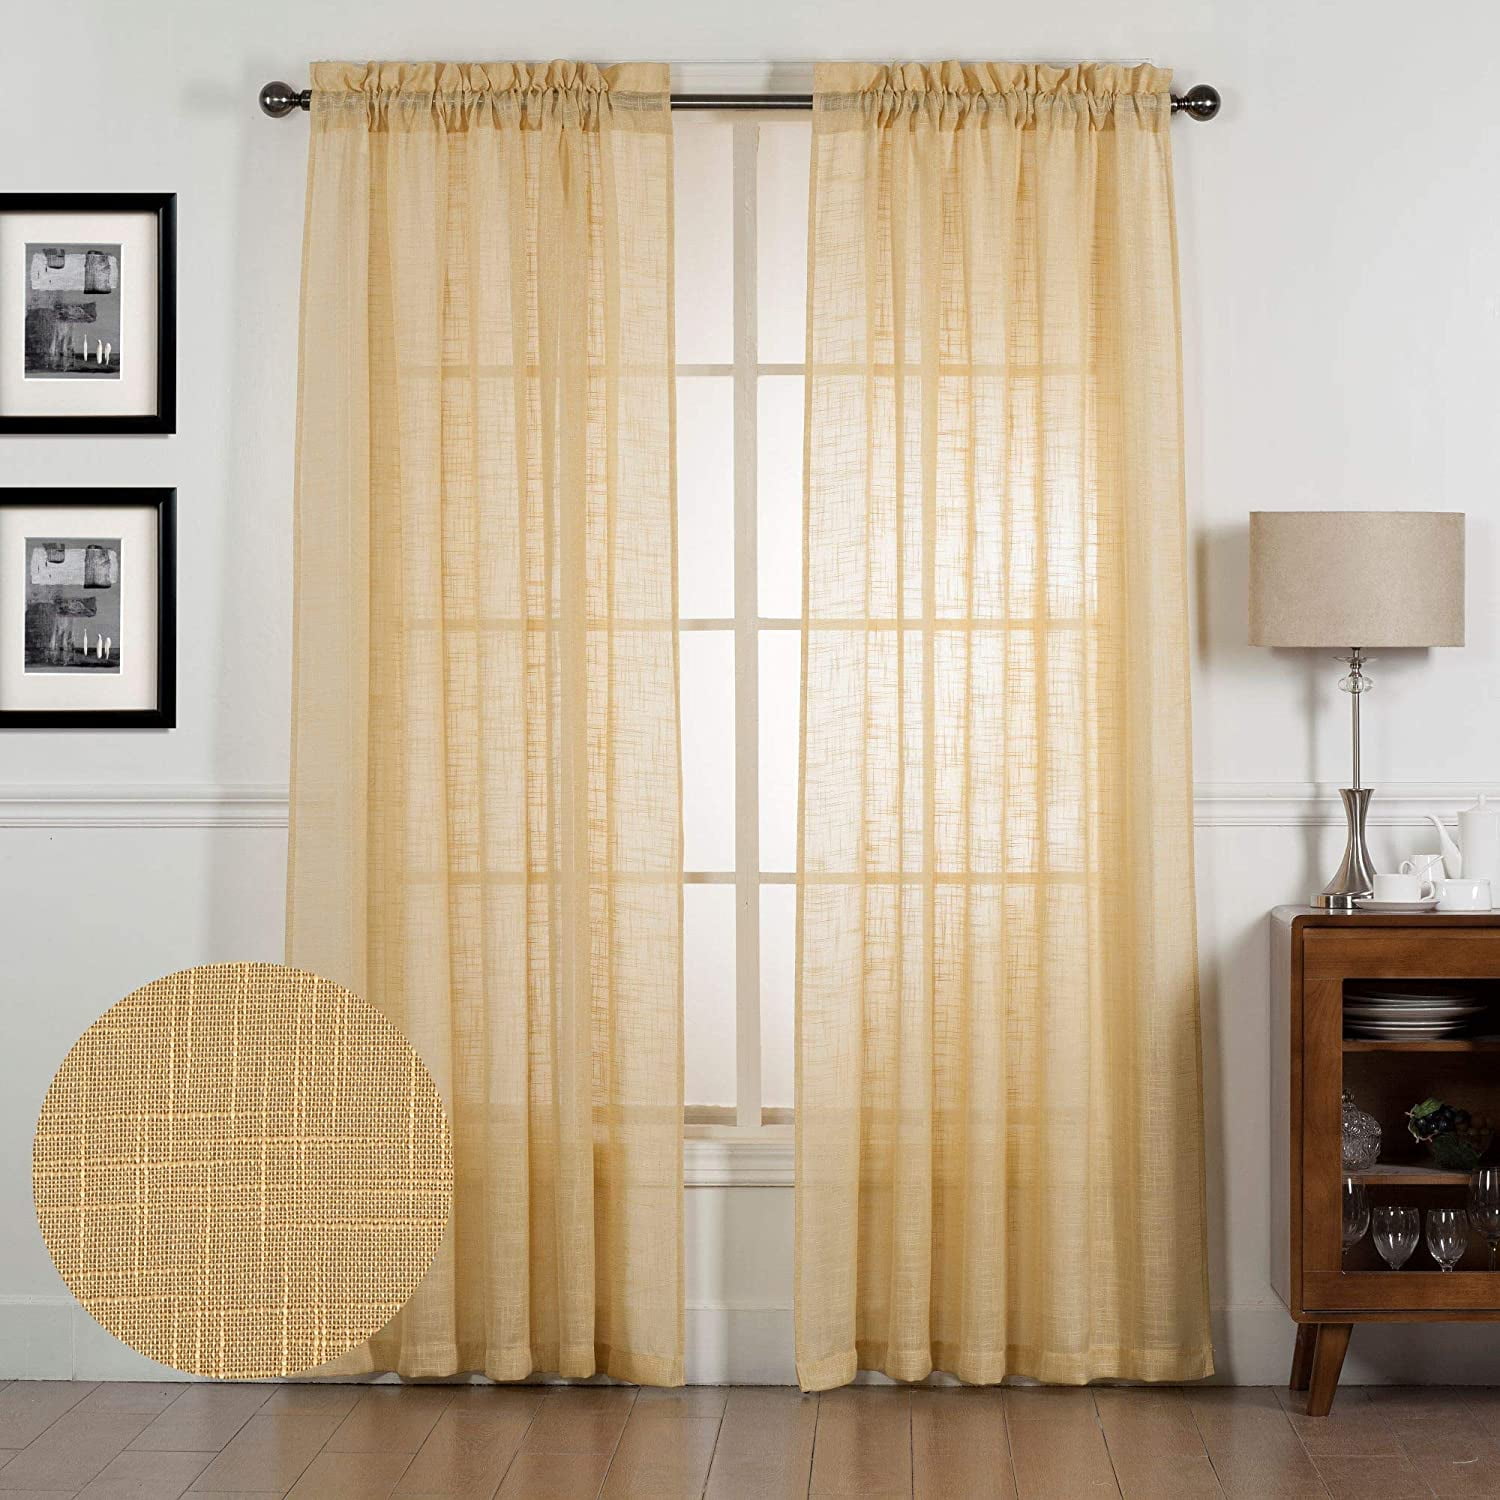 Gold Faux Linen Solid Color Semi Voile Window Curtains For Bedroom And Living Room Set Of 2 Panels 84 Long Com